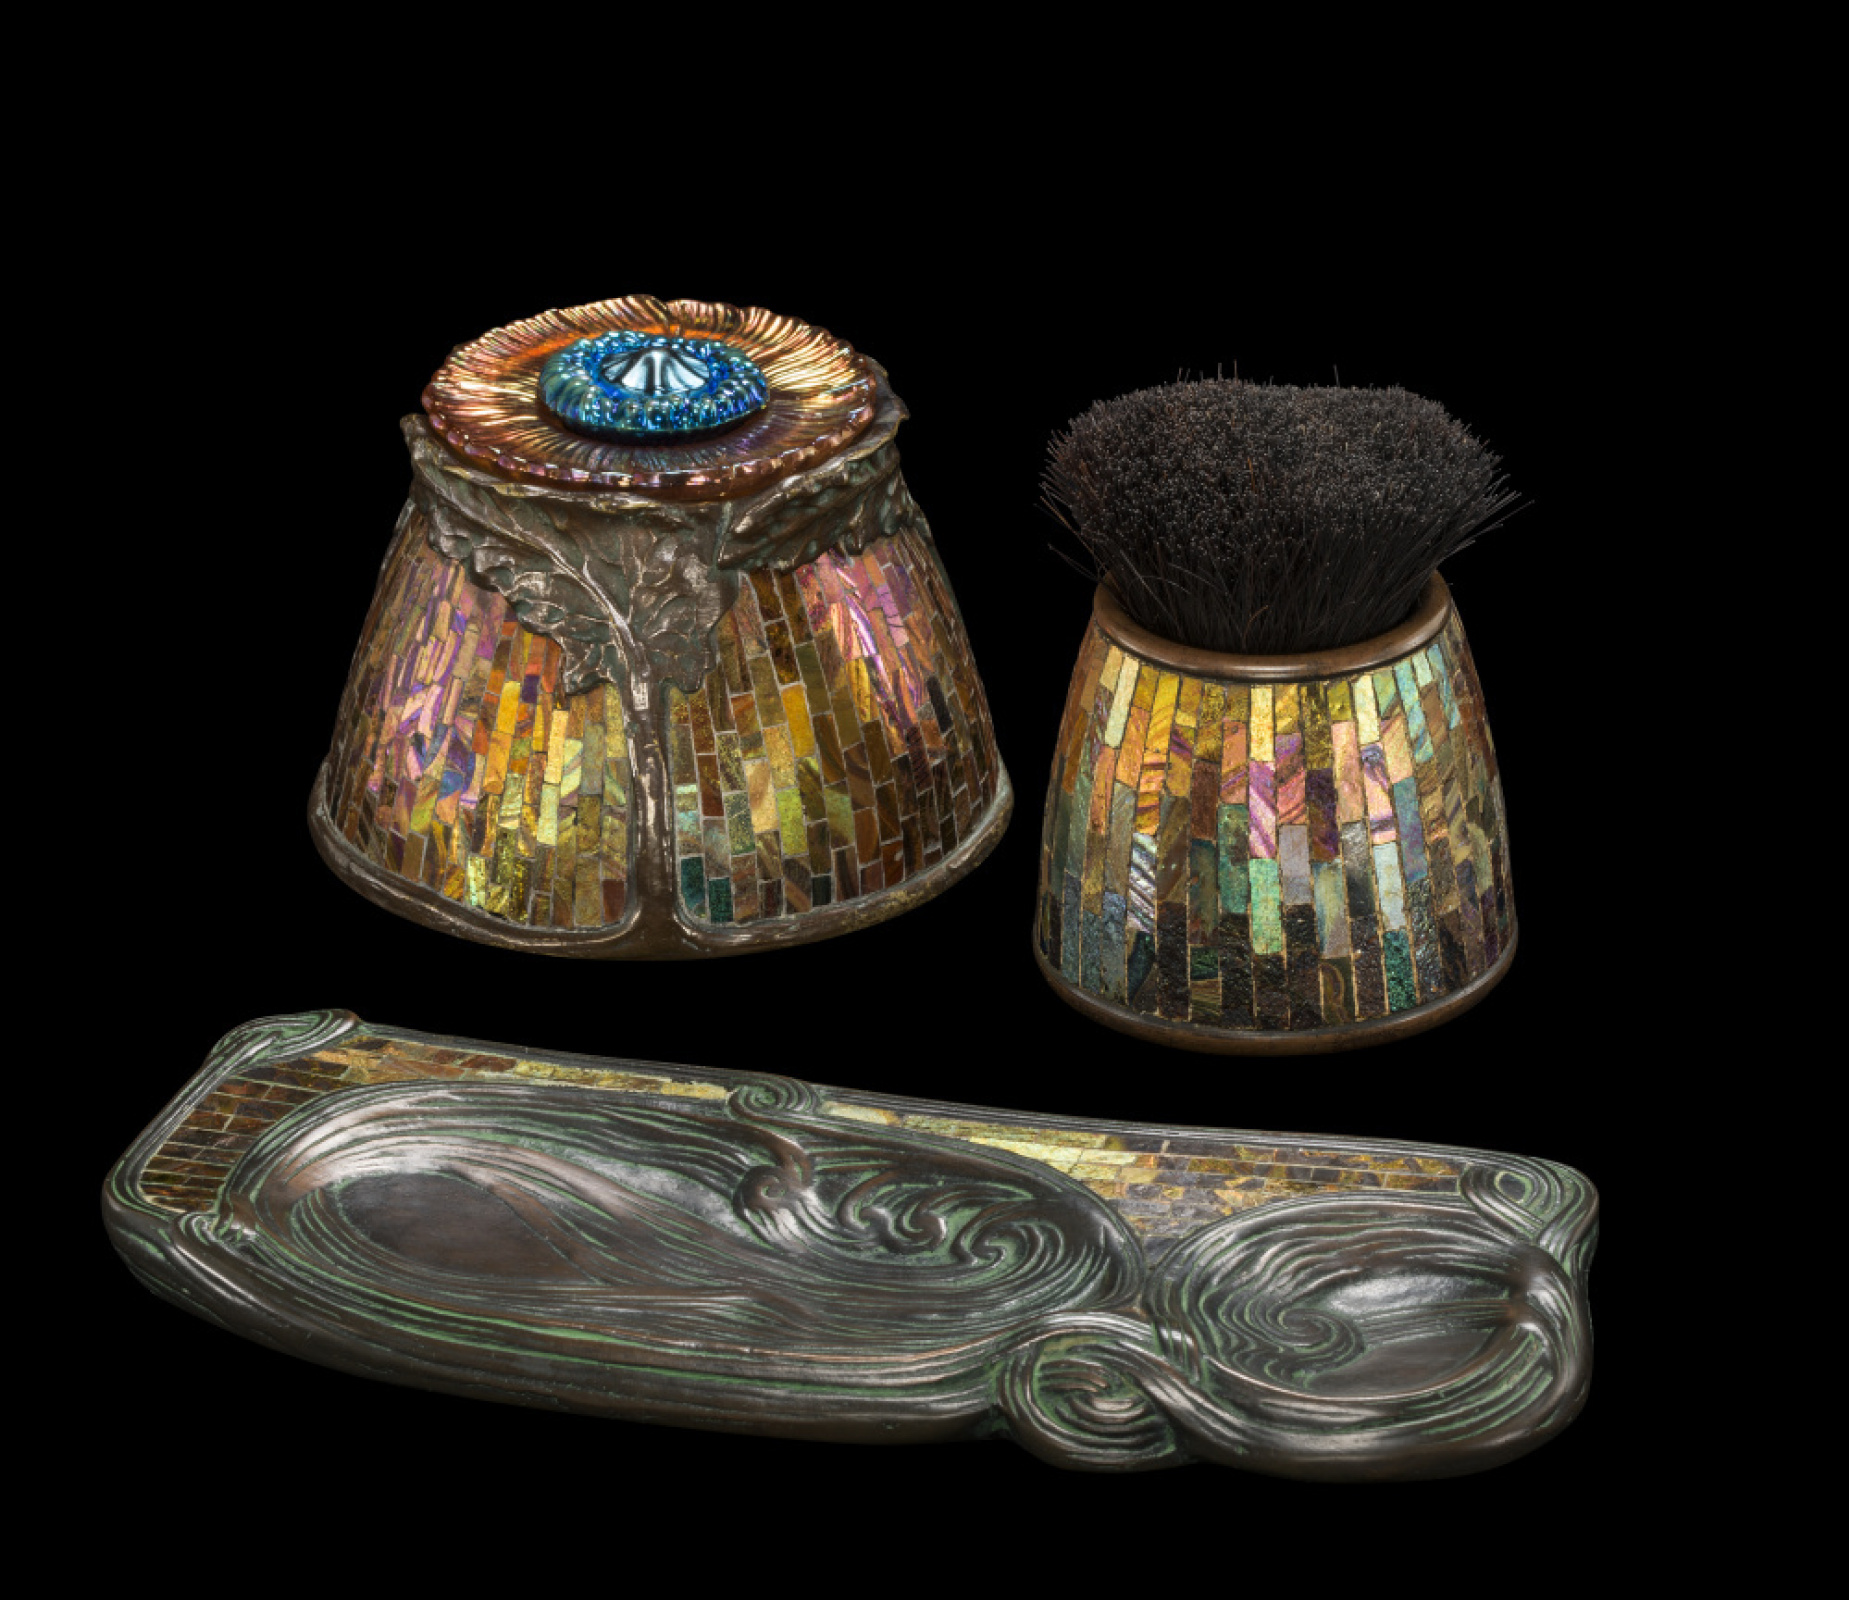 Louis Comfort Tiffany exhibit comes to the MAC